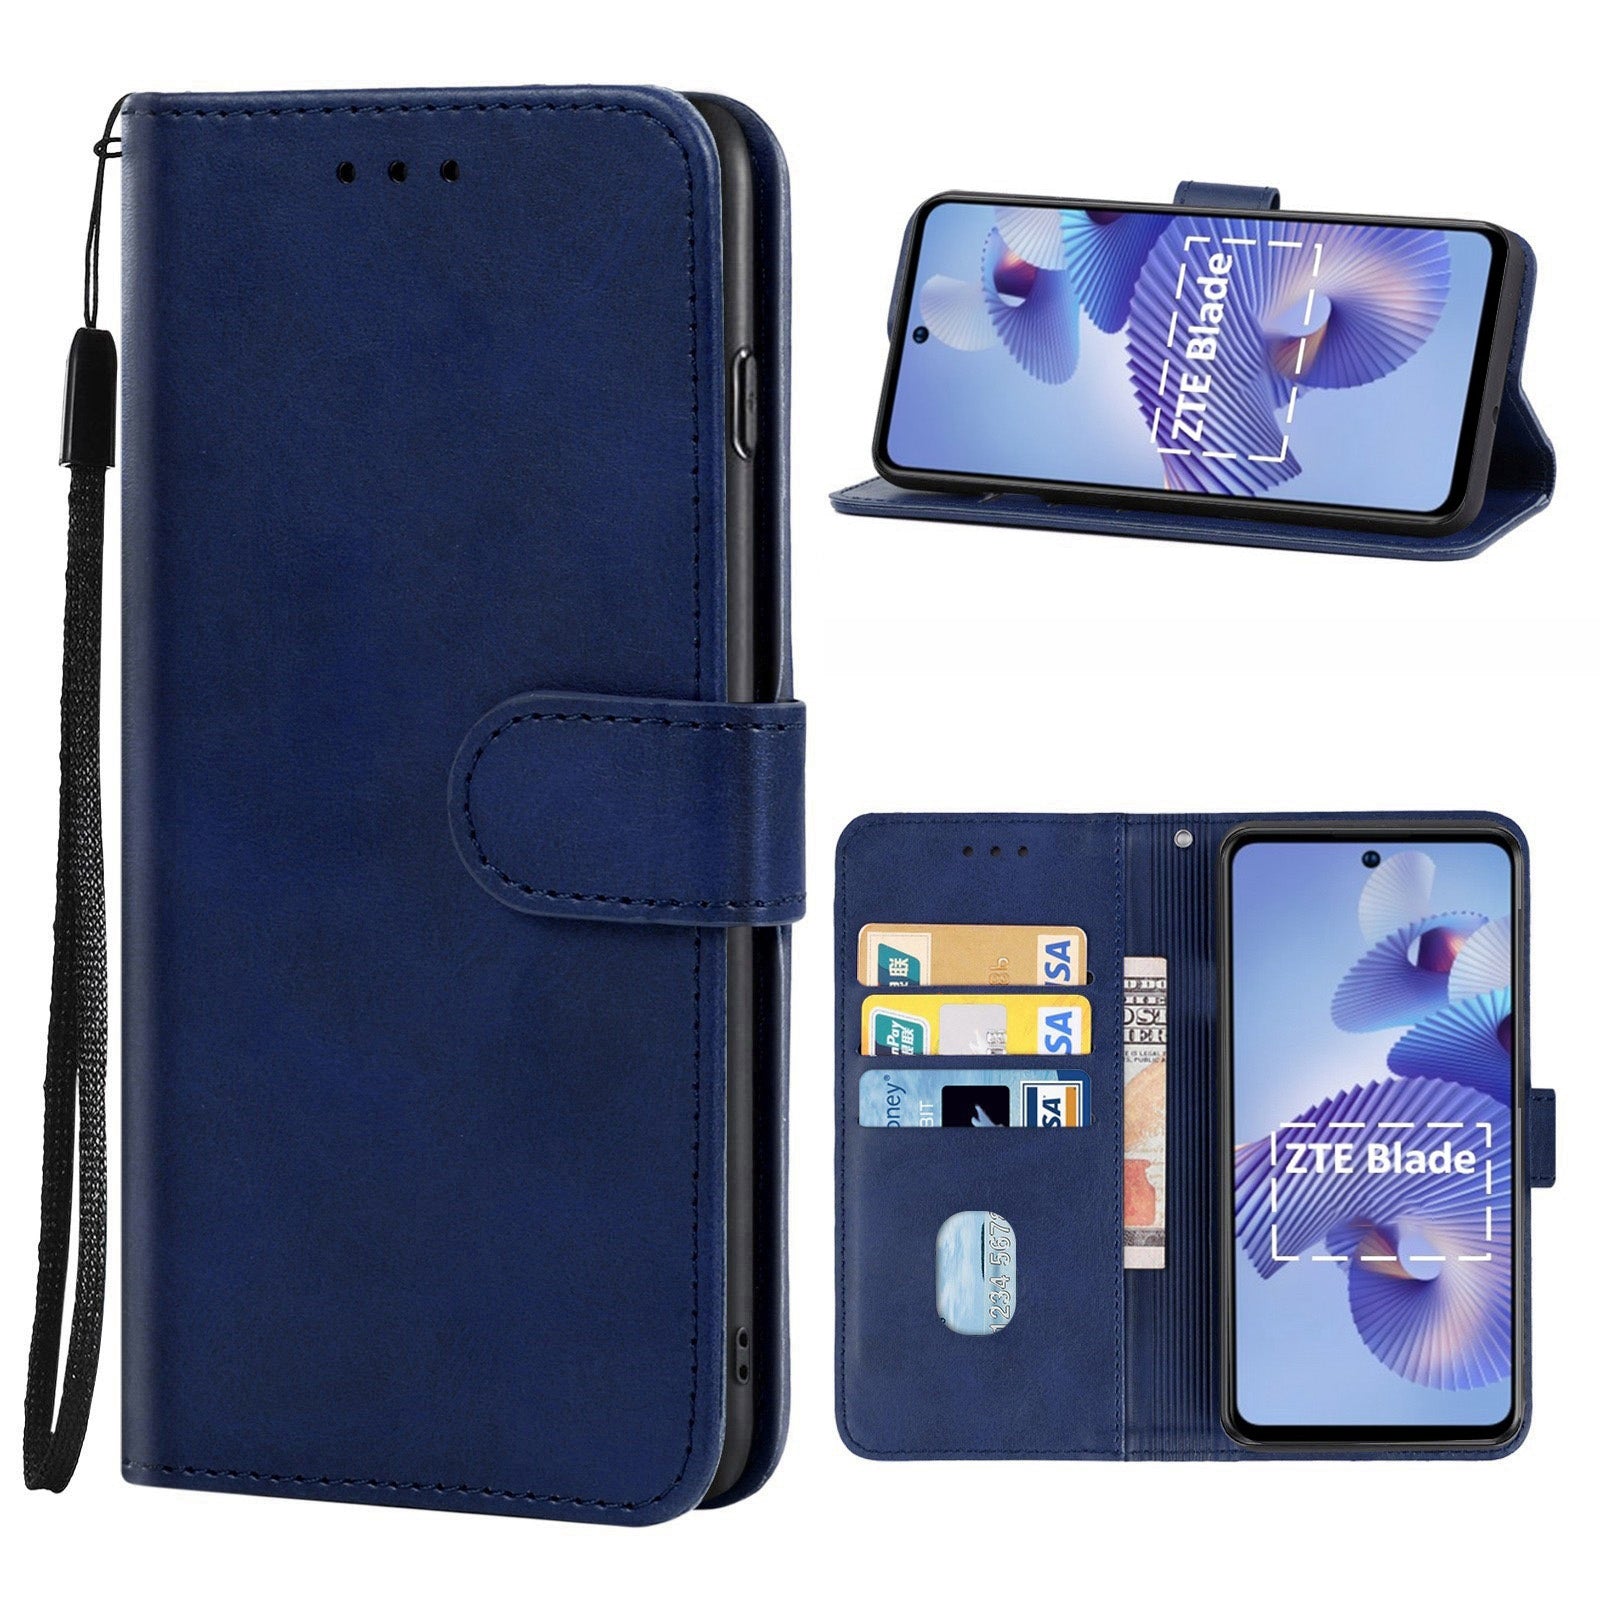 Uniqkart for ZTE Blade L220 Calf Texture Leather Case Wallet Stand Cell Phone Cover - Blue